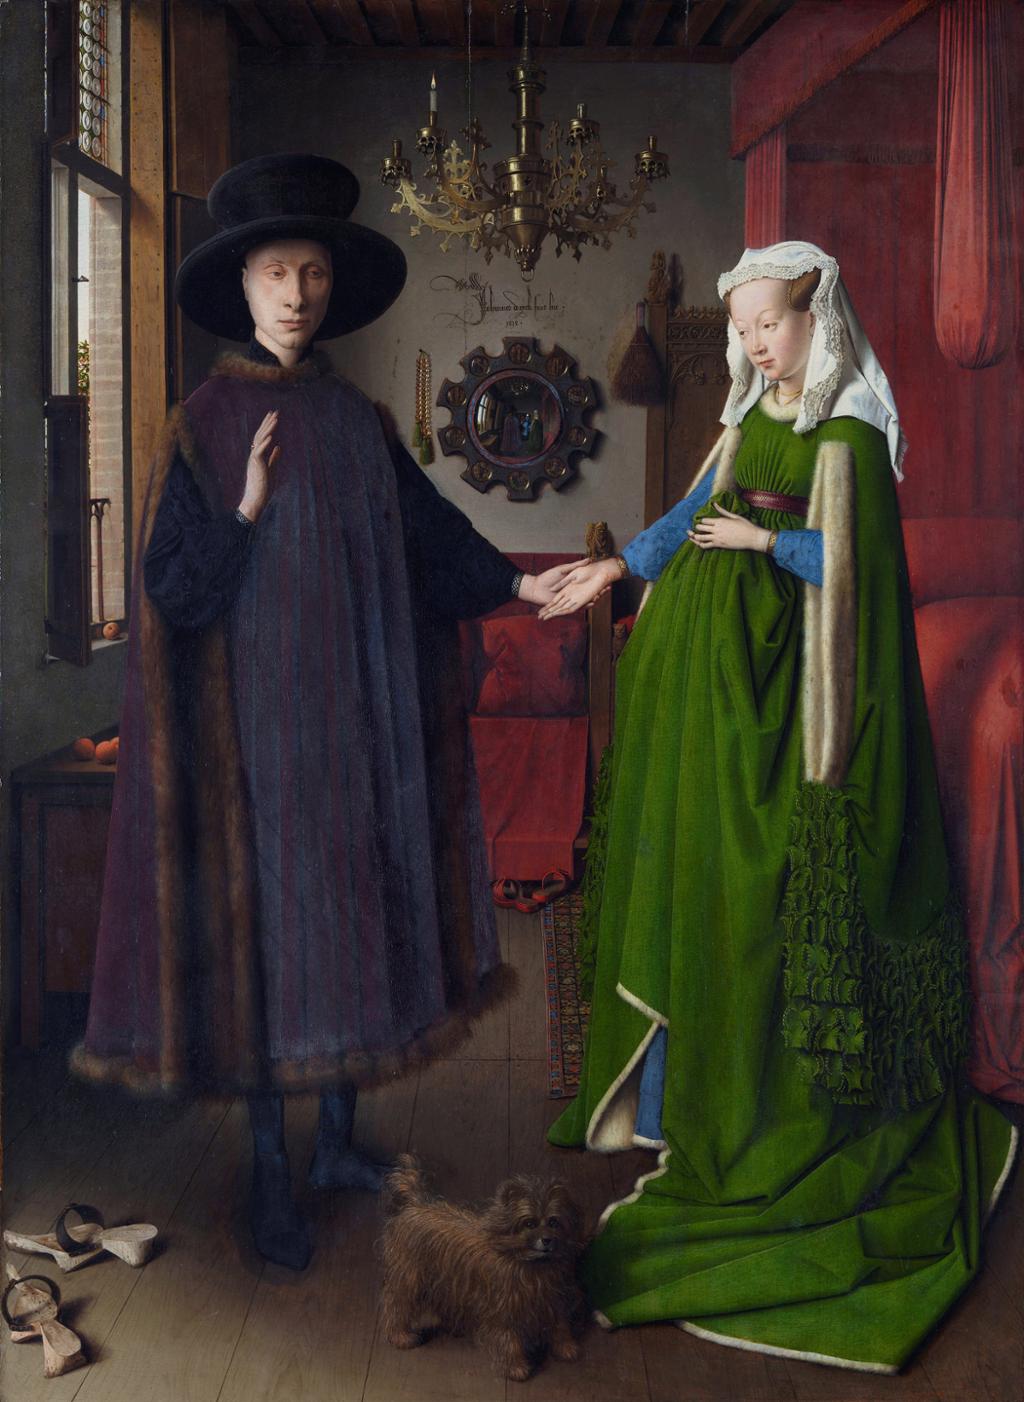 Painting: We see a man, woman, and small dog standing in a bedroom. The man is wearing a dark frock and a big hat, the woman a green dress. We see a red bed to the right, a large brass chandelier in the centre, and a window to the left. 